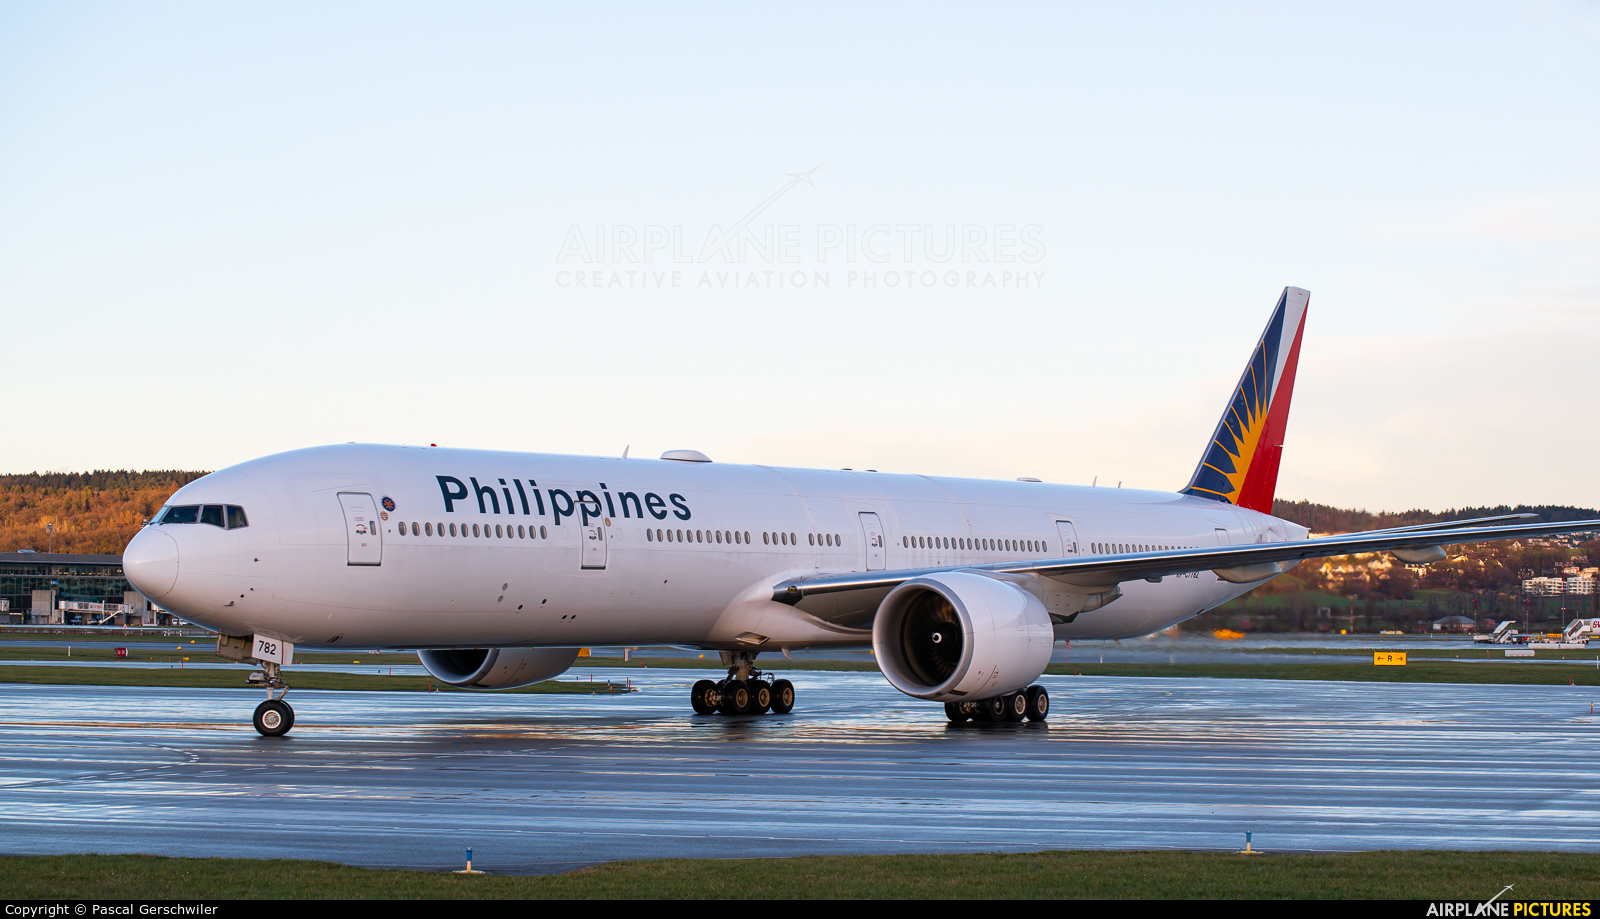 Philippines Airlines RP-C7782 aircraft at Zurich